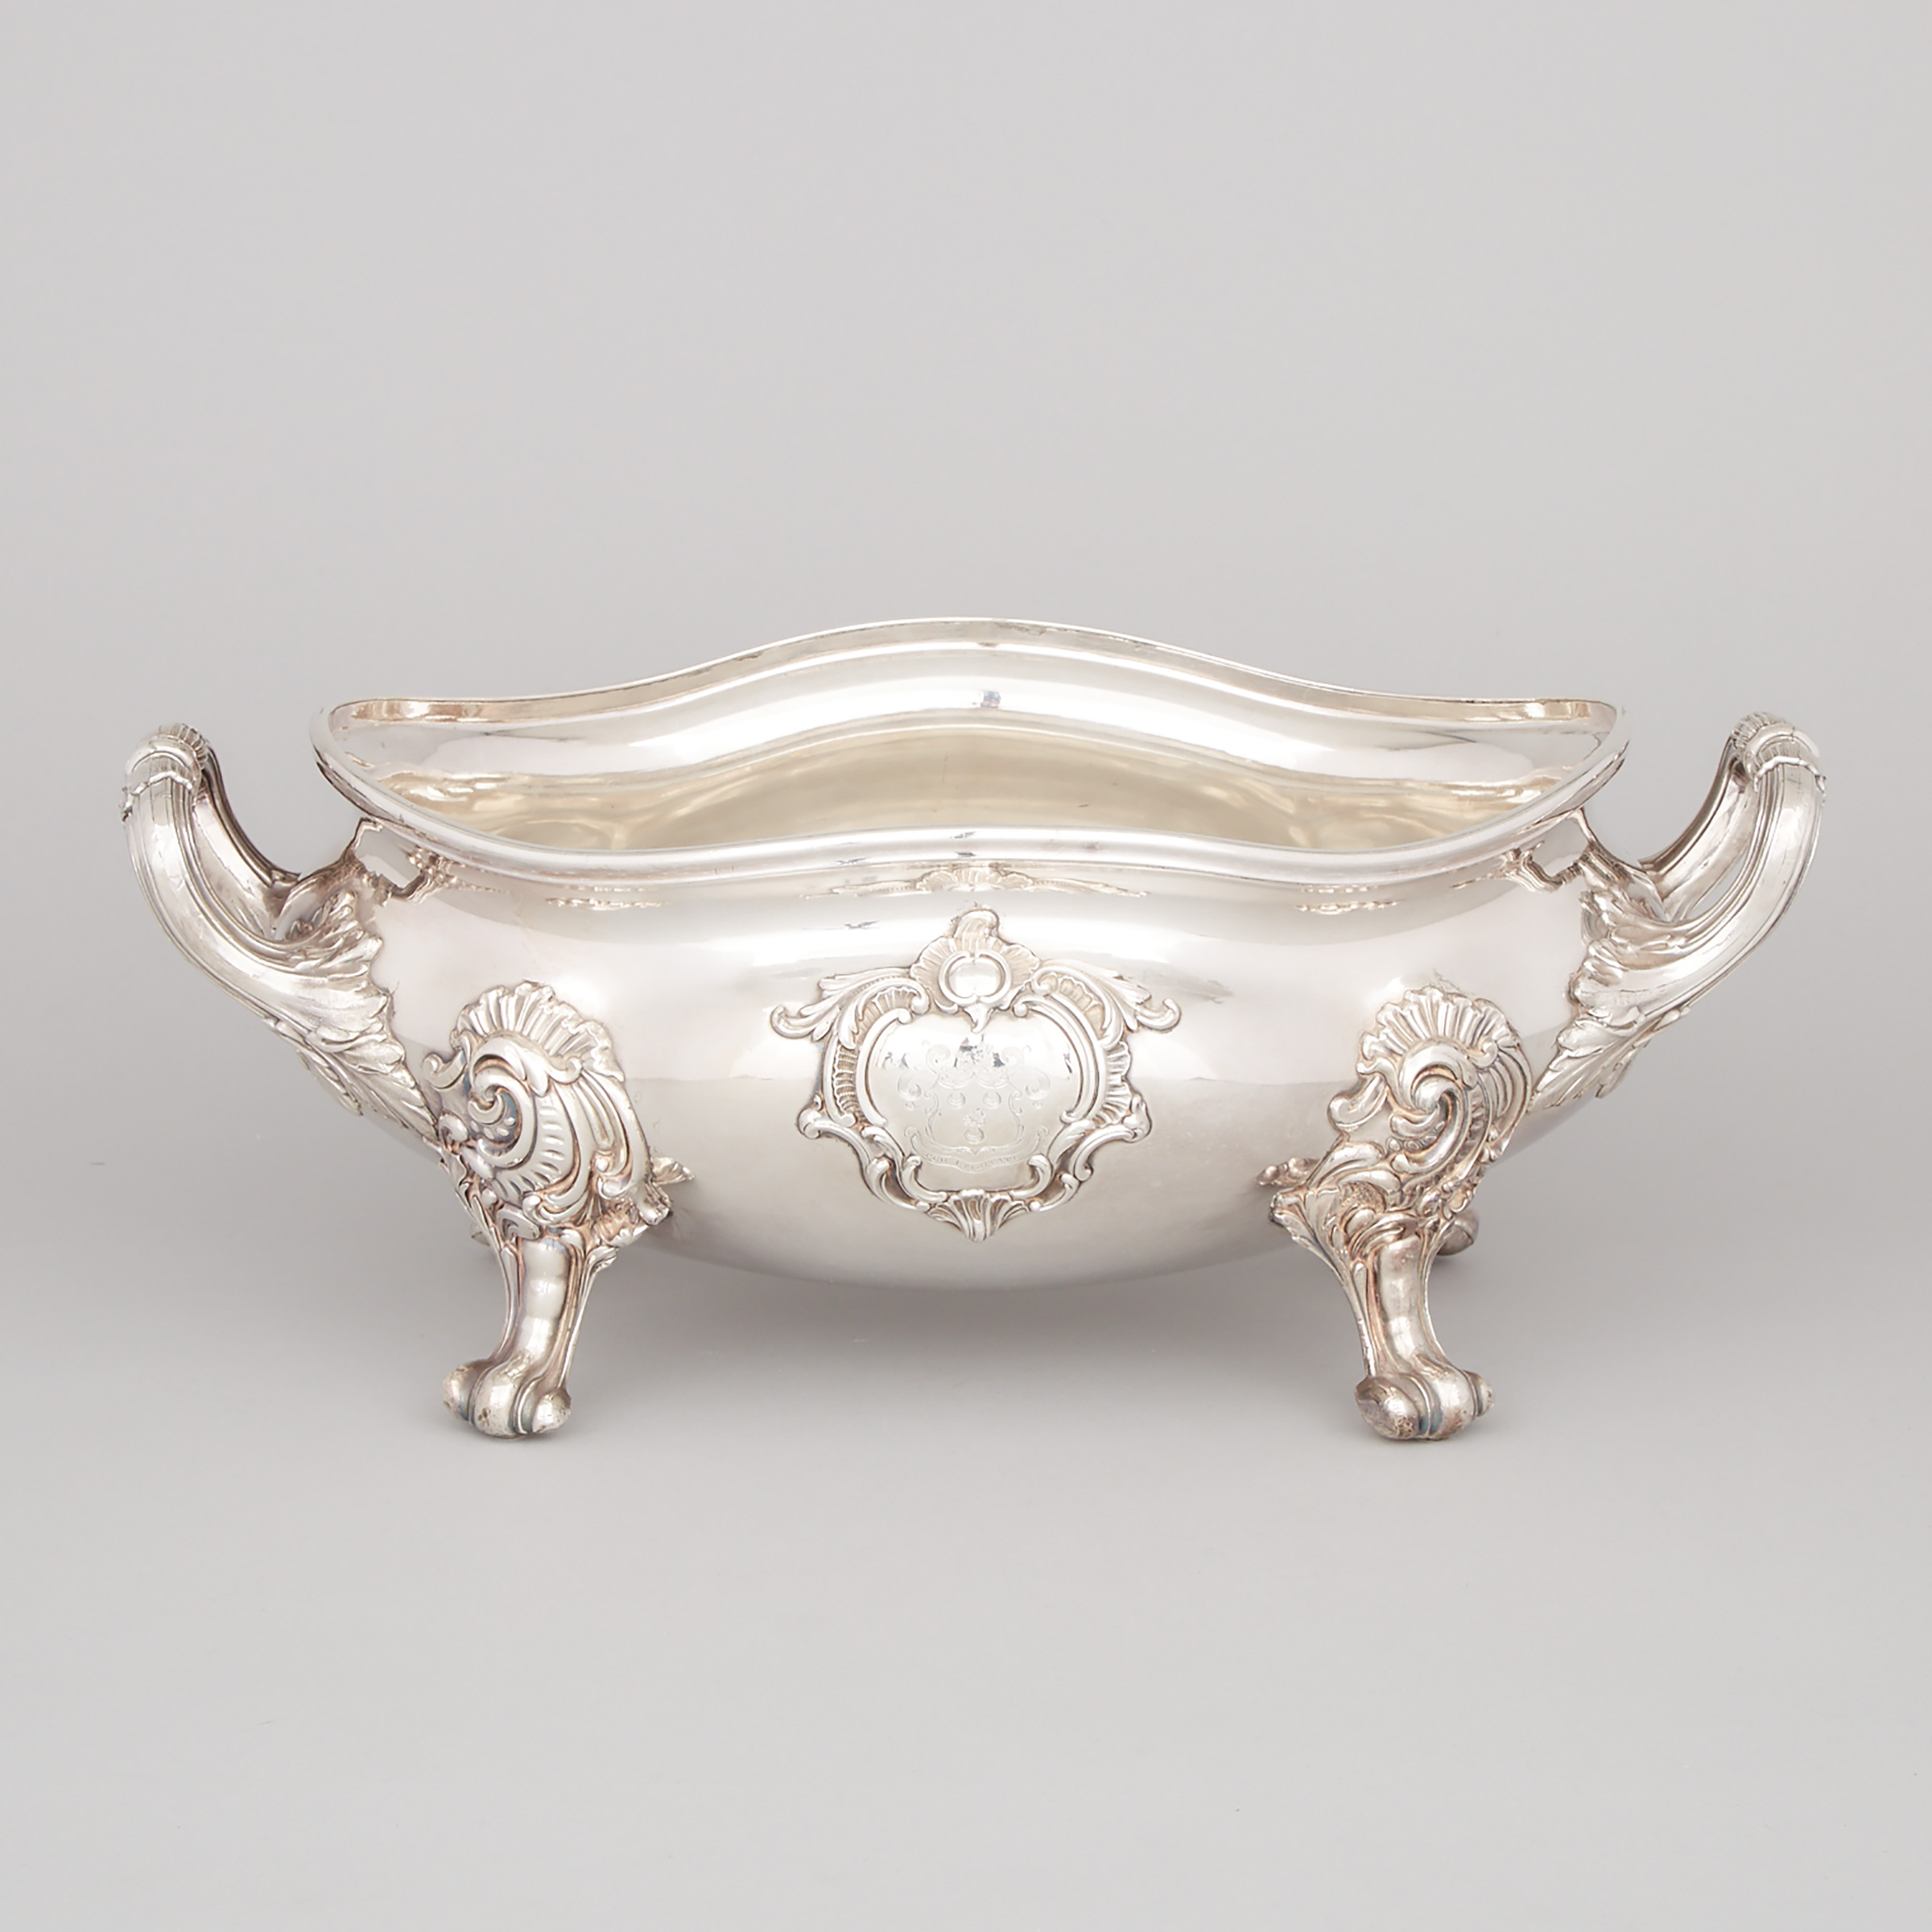 Old Sheffield Plate Shaped Oval Soup Tureen, c.1825